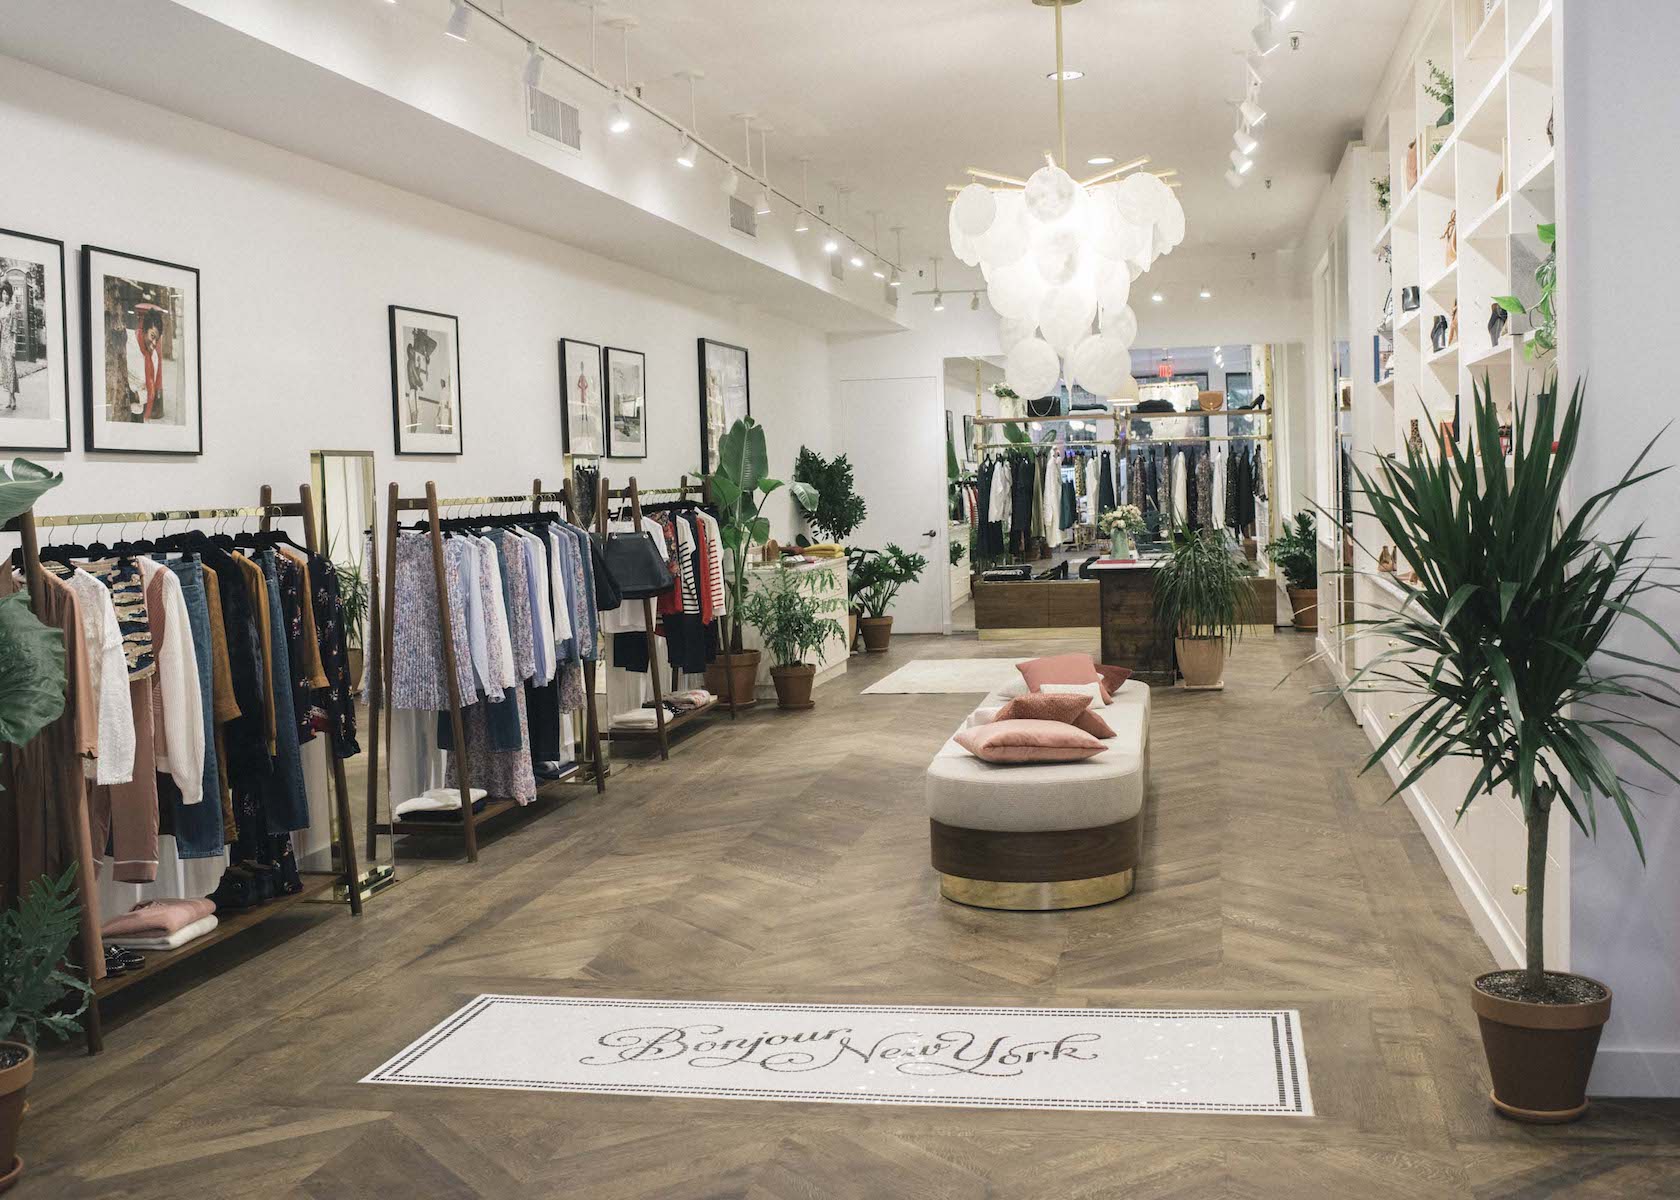 French Brand Sezane's First US Flagship Store In Nolita